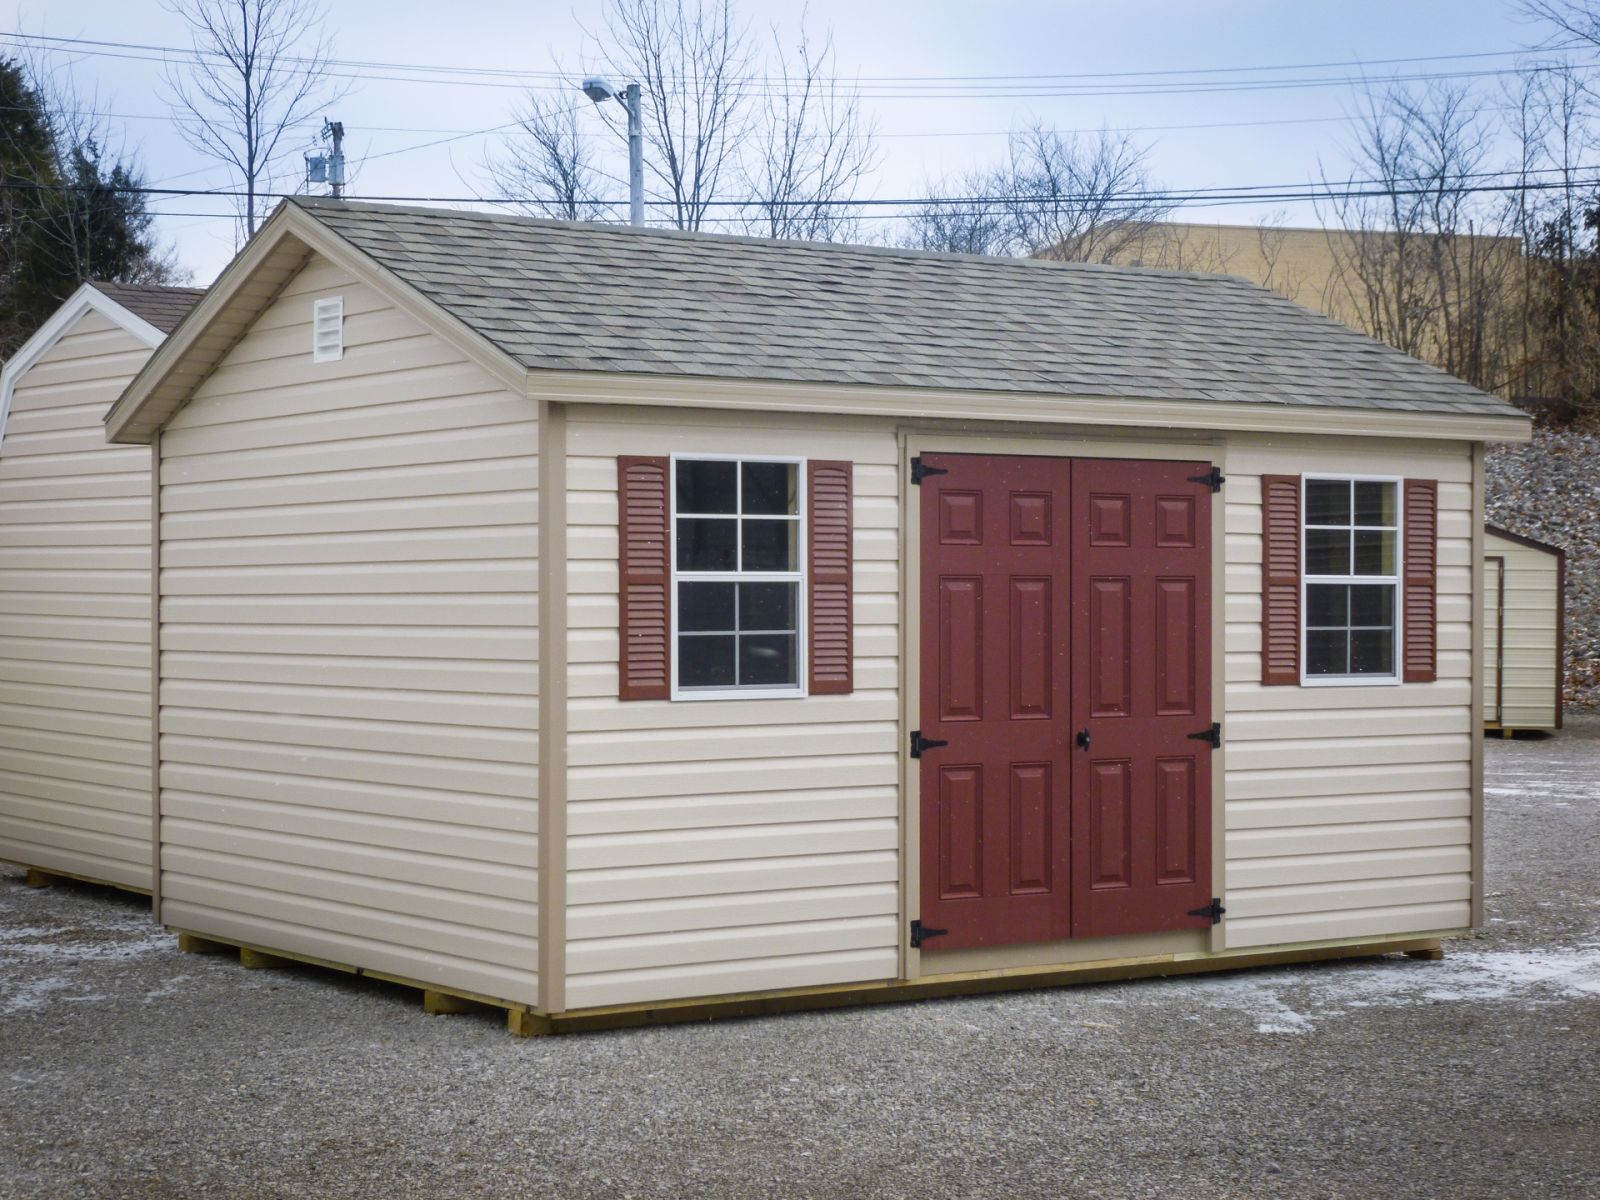 Photos of Storage Sheds in KY &amp; TN Esh's Utility Buildings